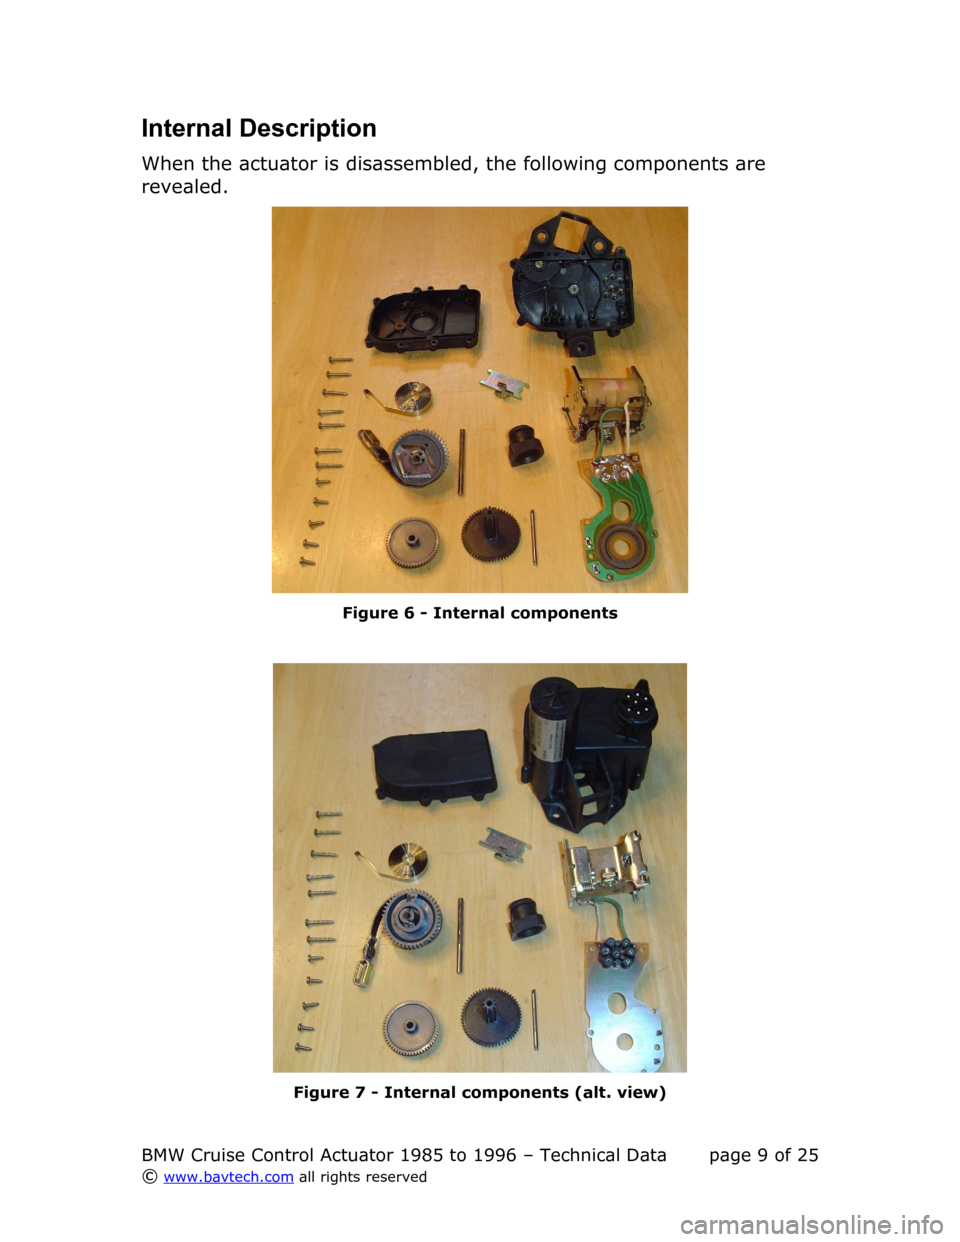 BMW 3 SERIES 1991 E36 Cruise Control Acutator Internal Description
When the actuator is disassembled, the following components are  
revealed.
Figure  6  - Internal components
Figure  7  - Internal components (alt. view)
BMW Cruise Control Actuat